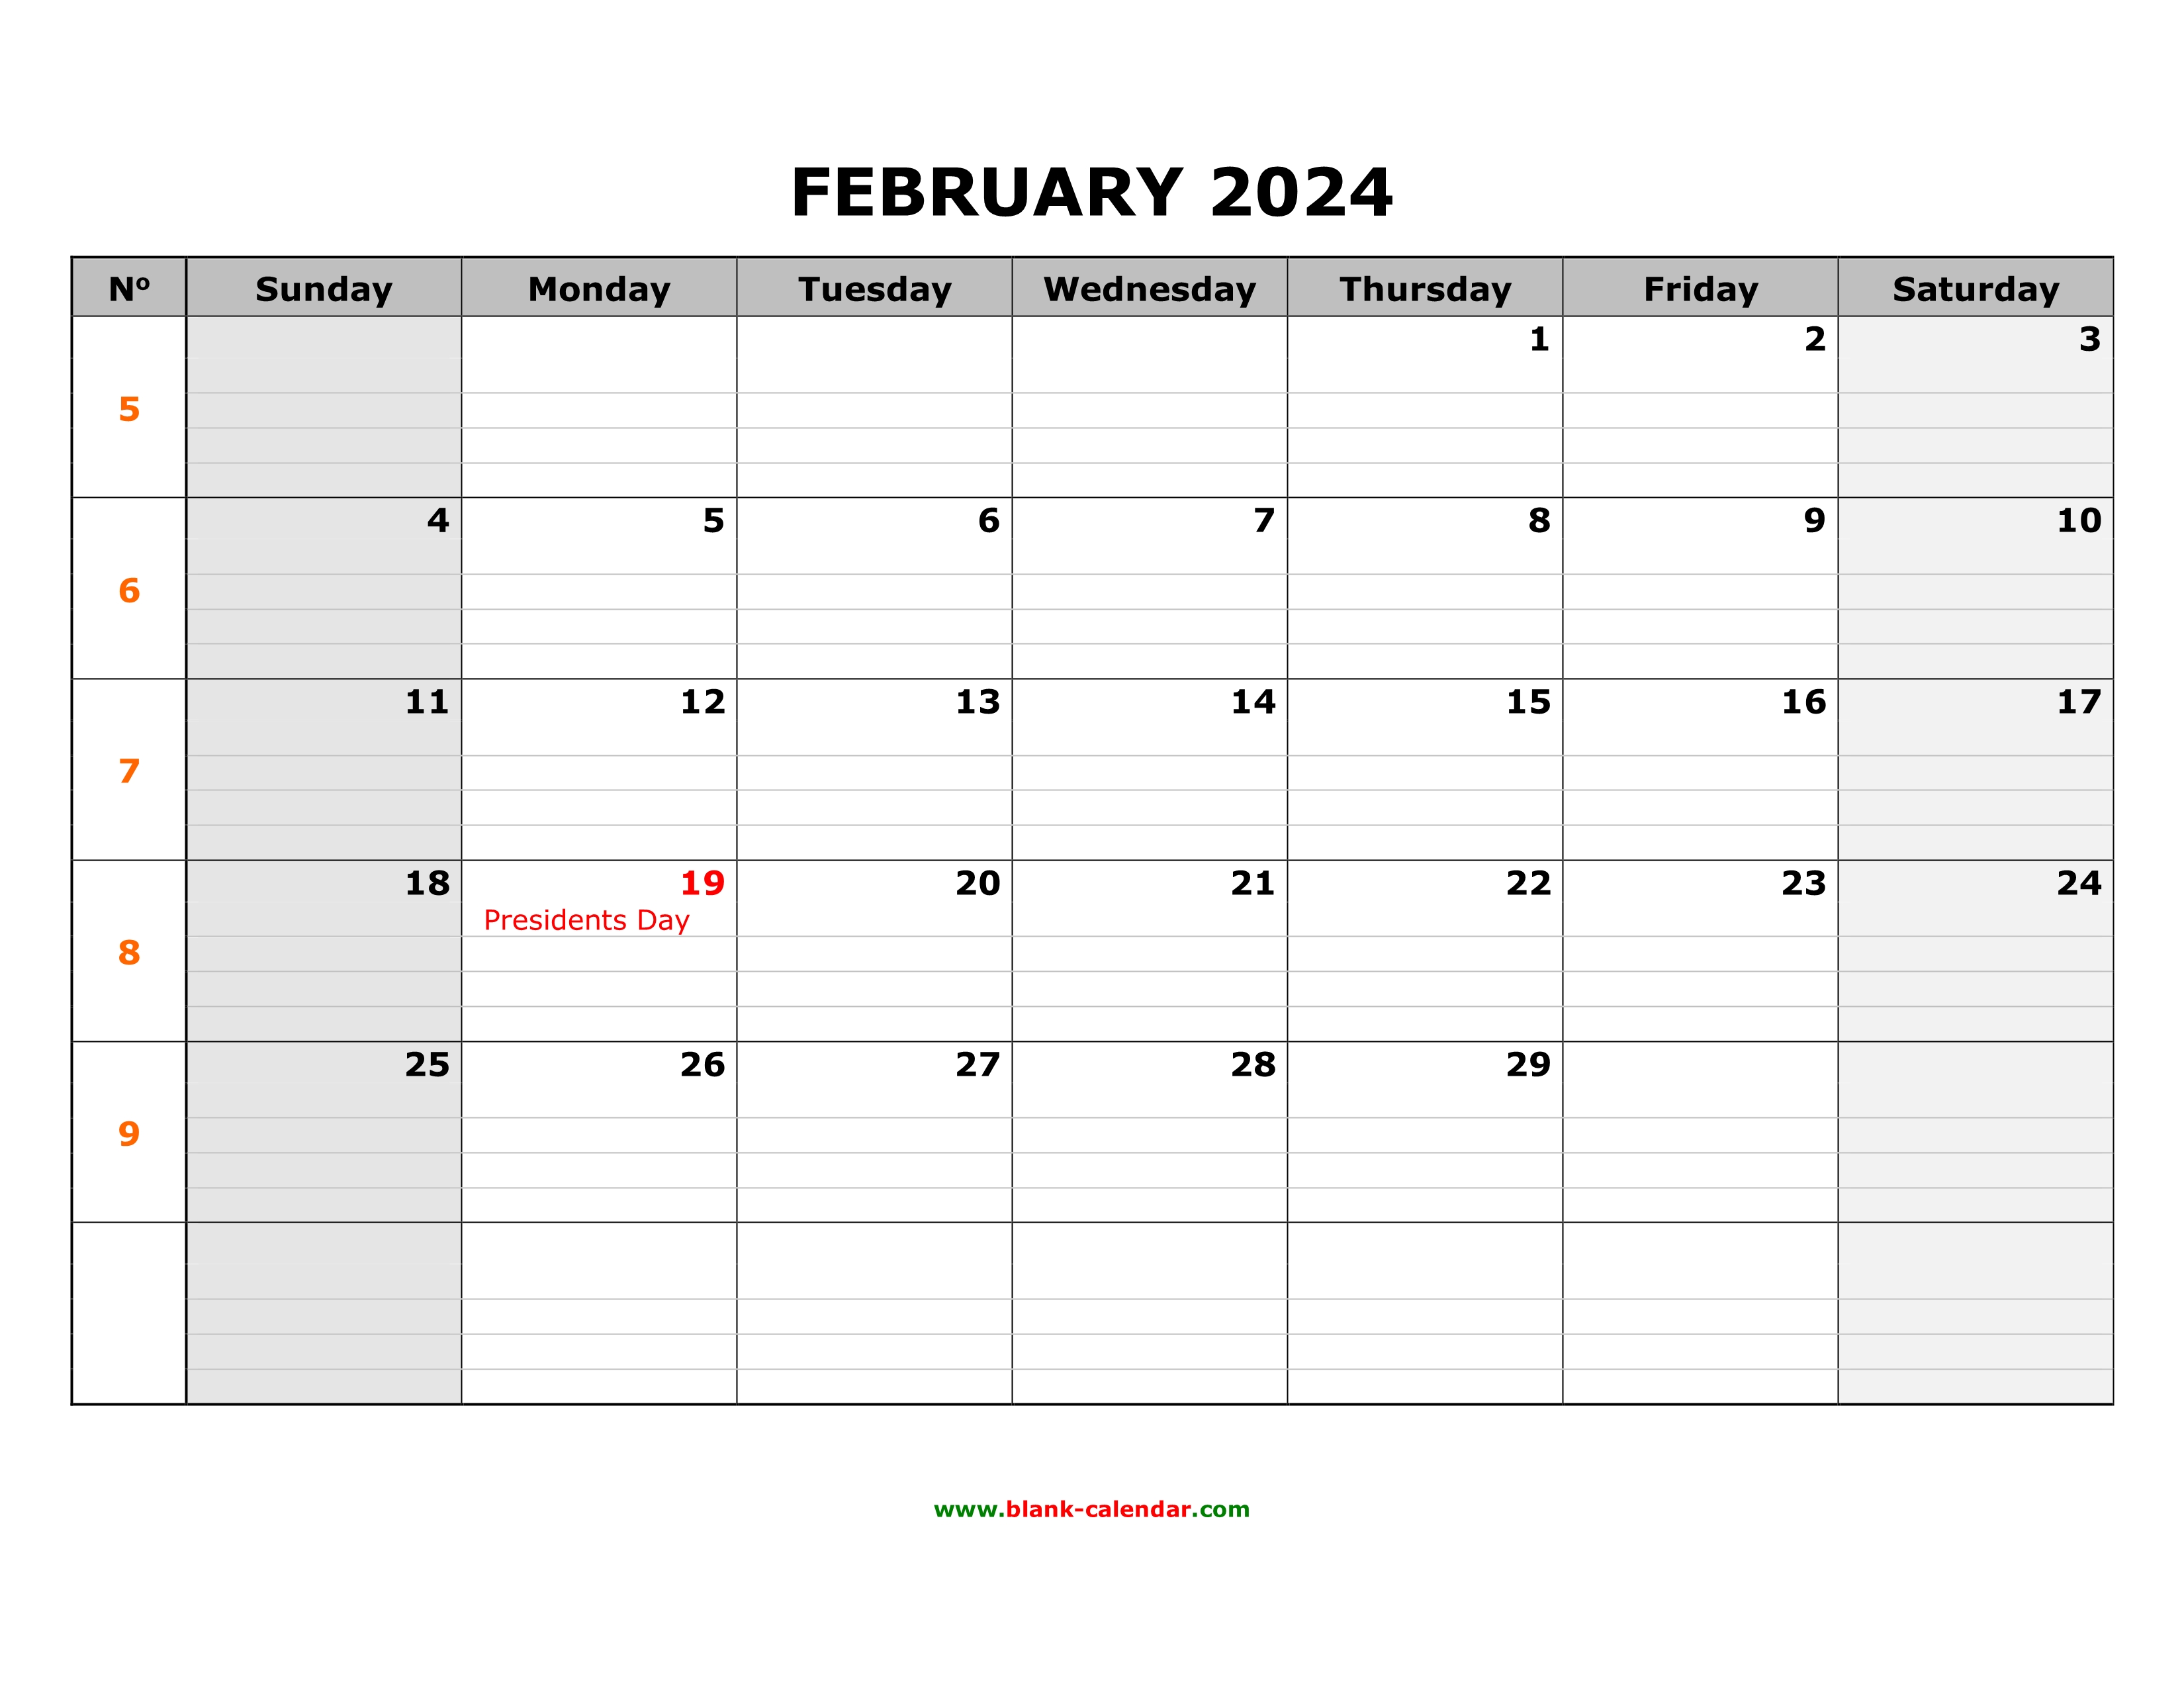 free-download-printable-february-2024-calendar-large-box-grid-space